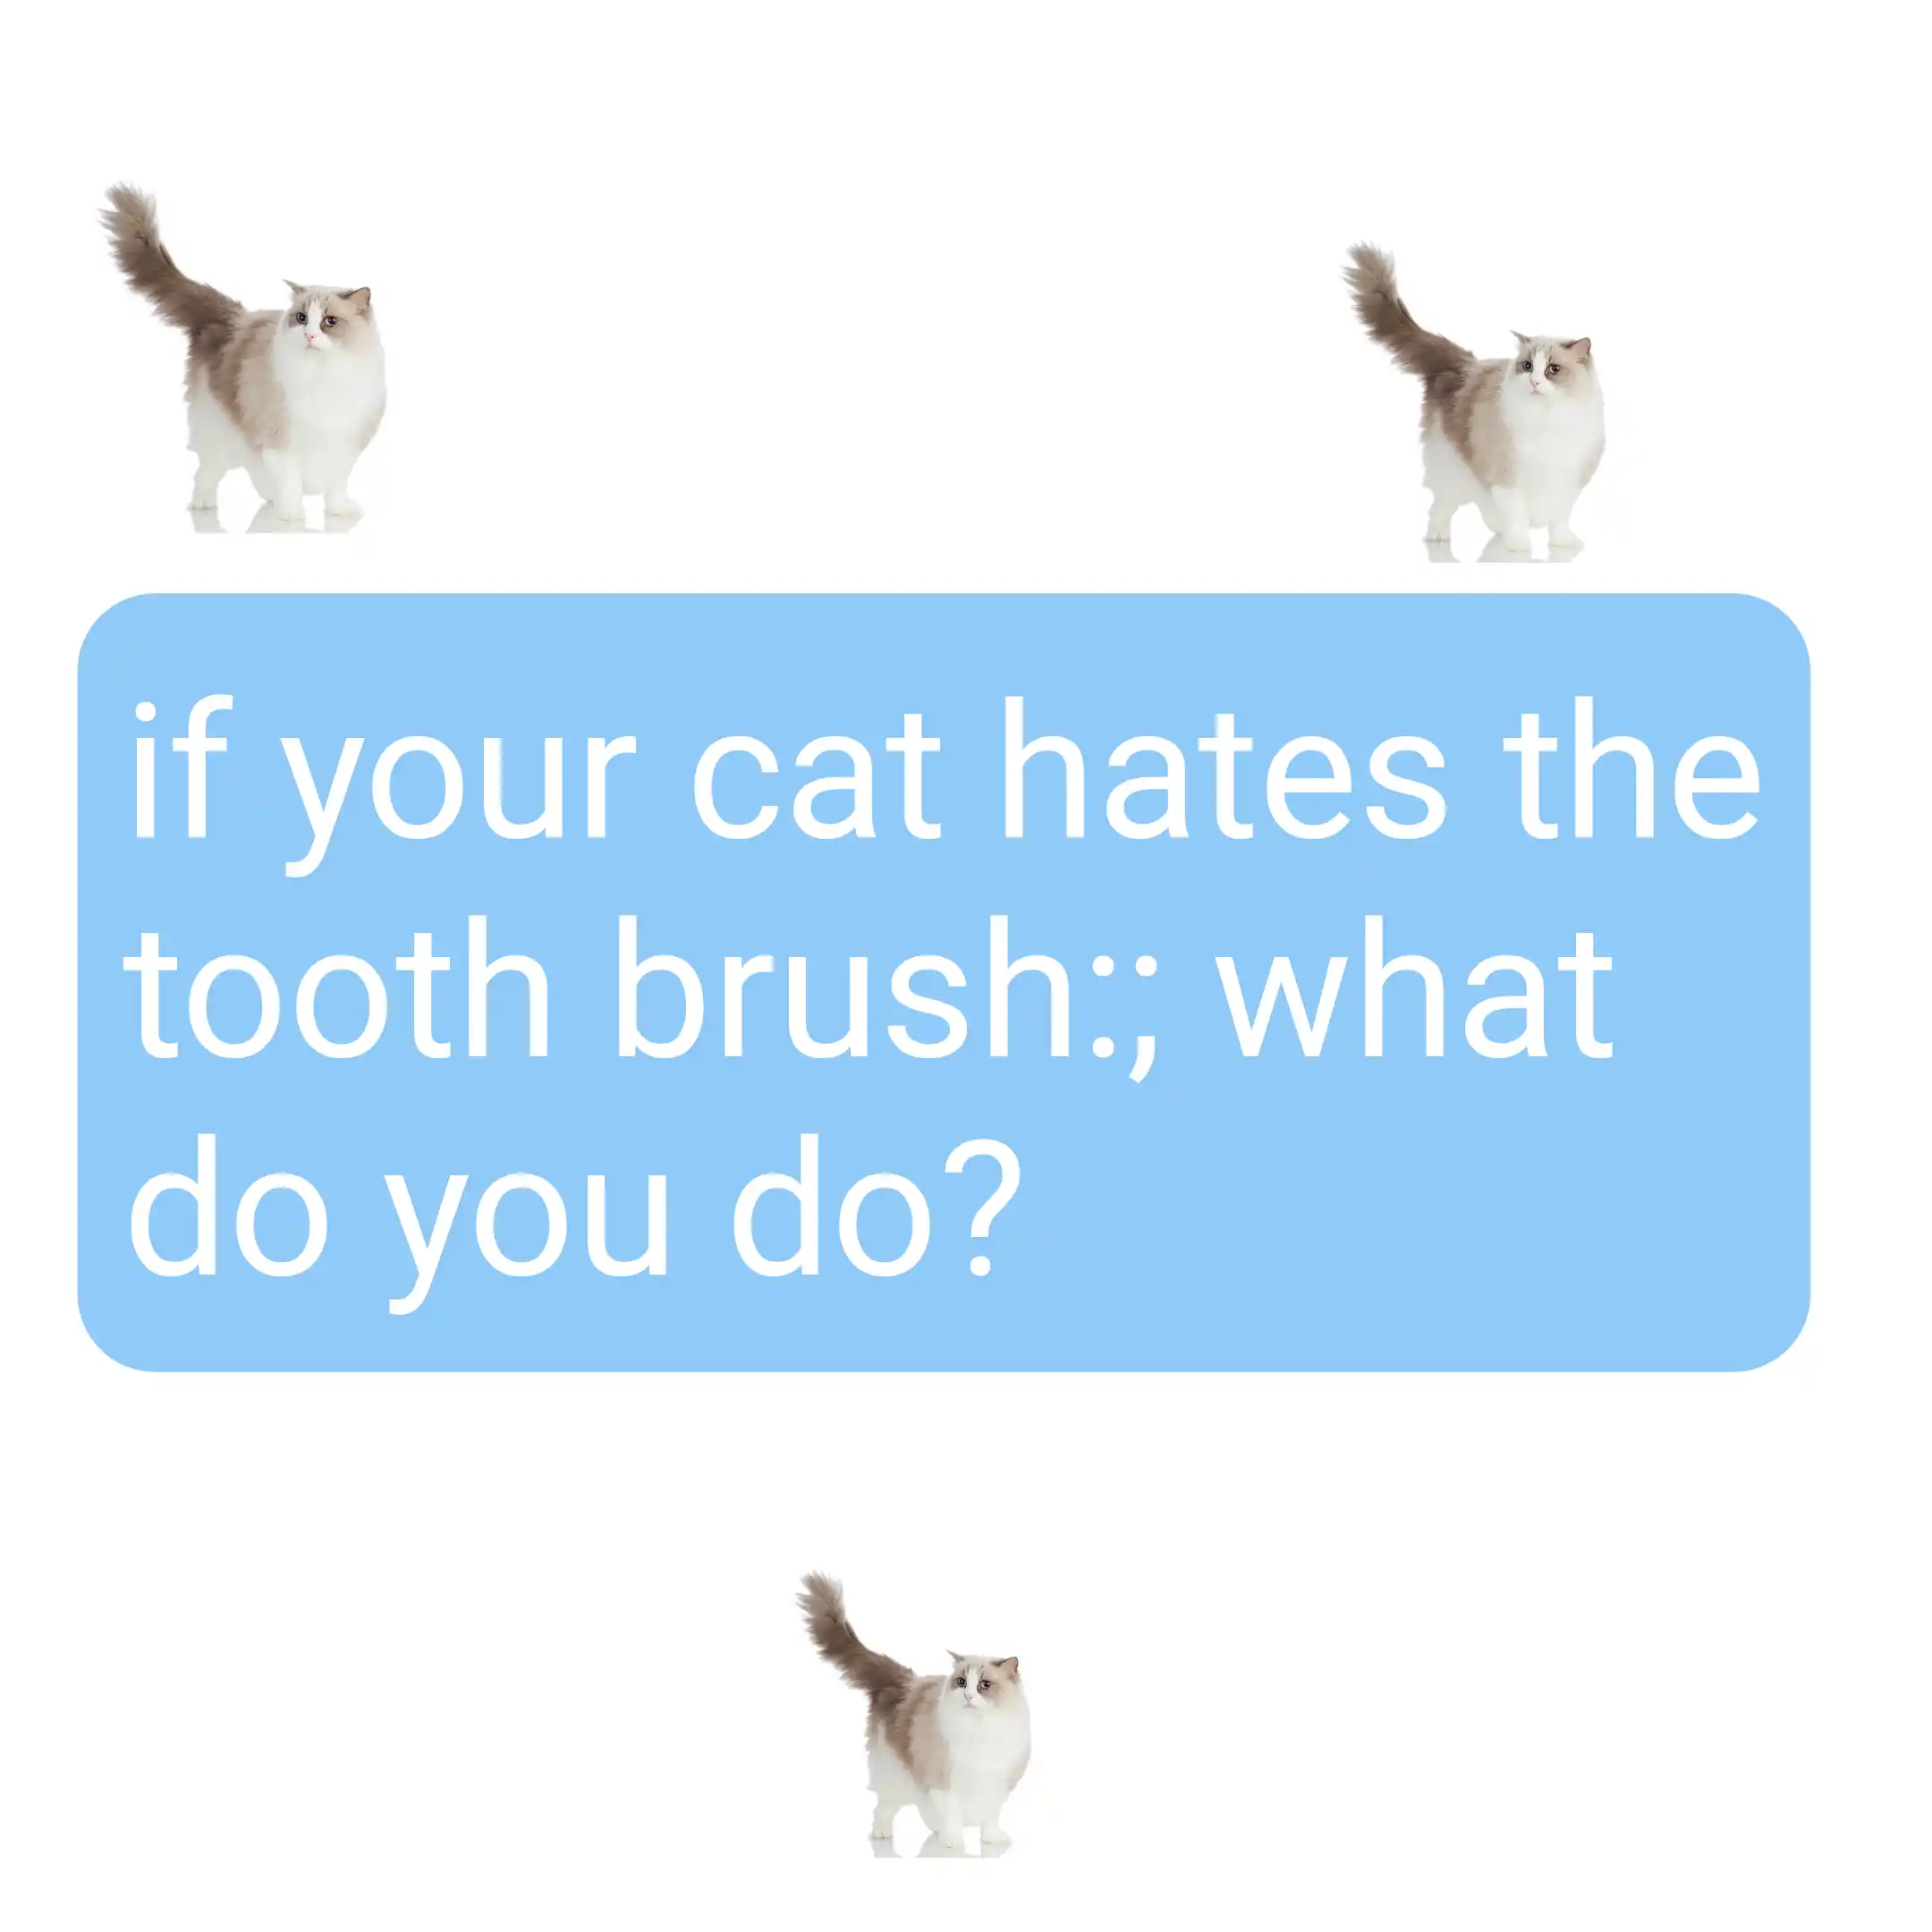 if your cat hates the tooth brush